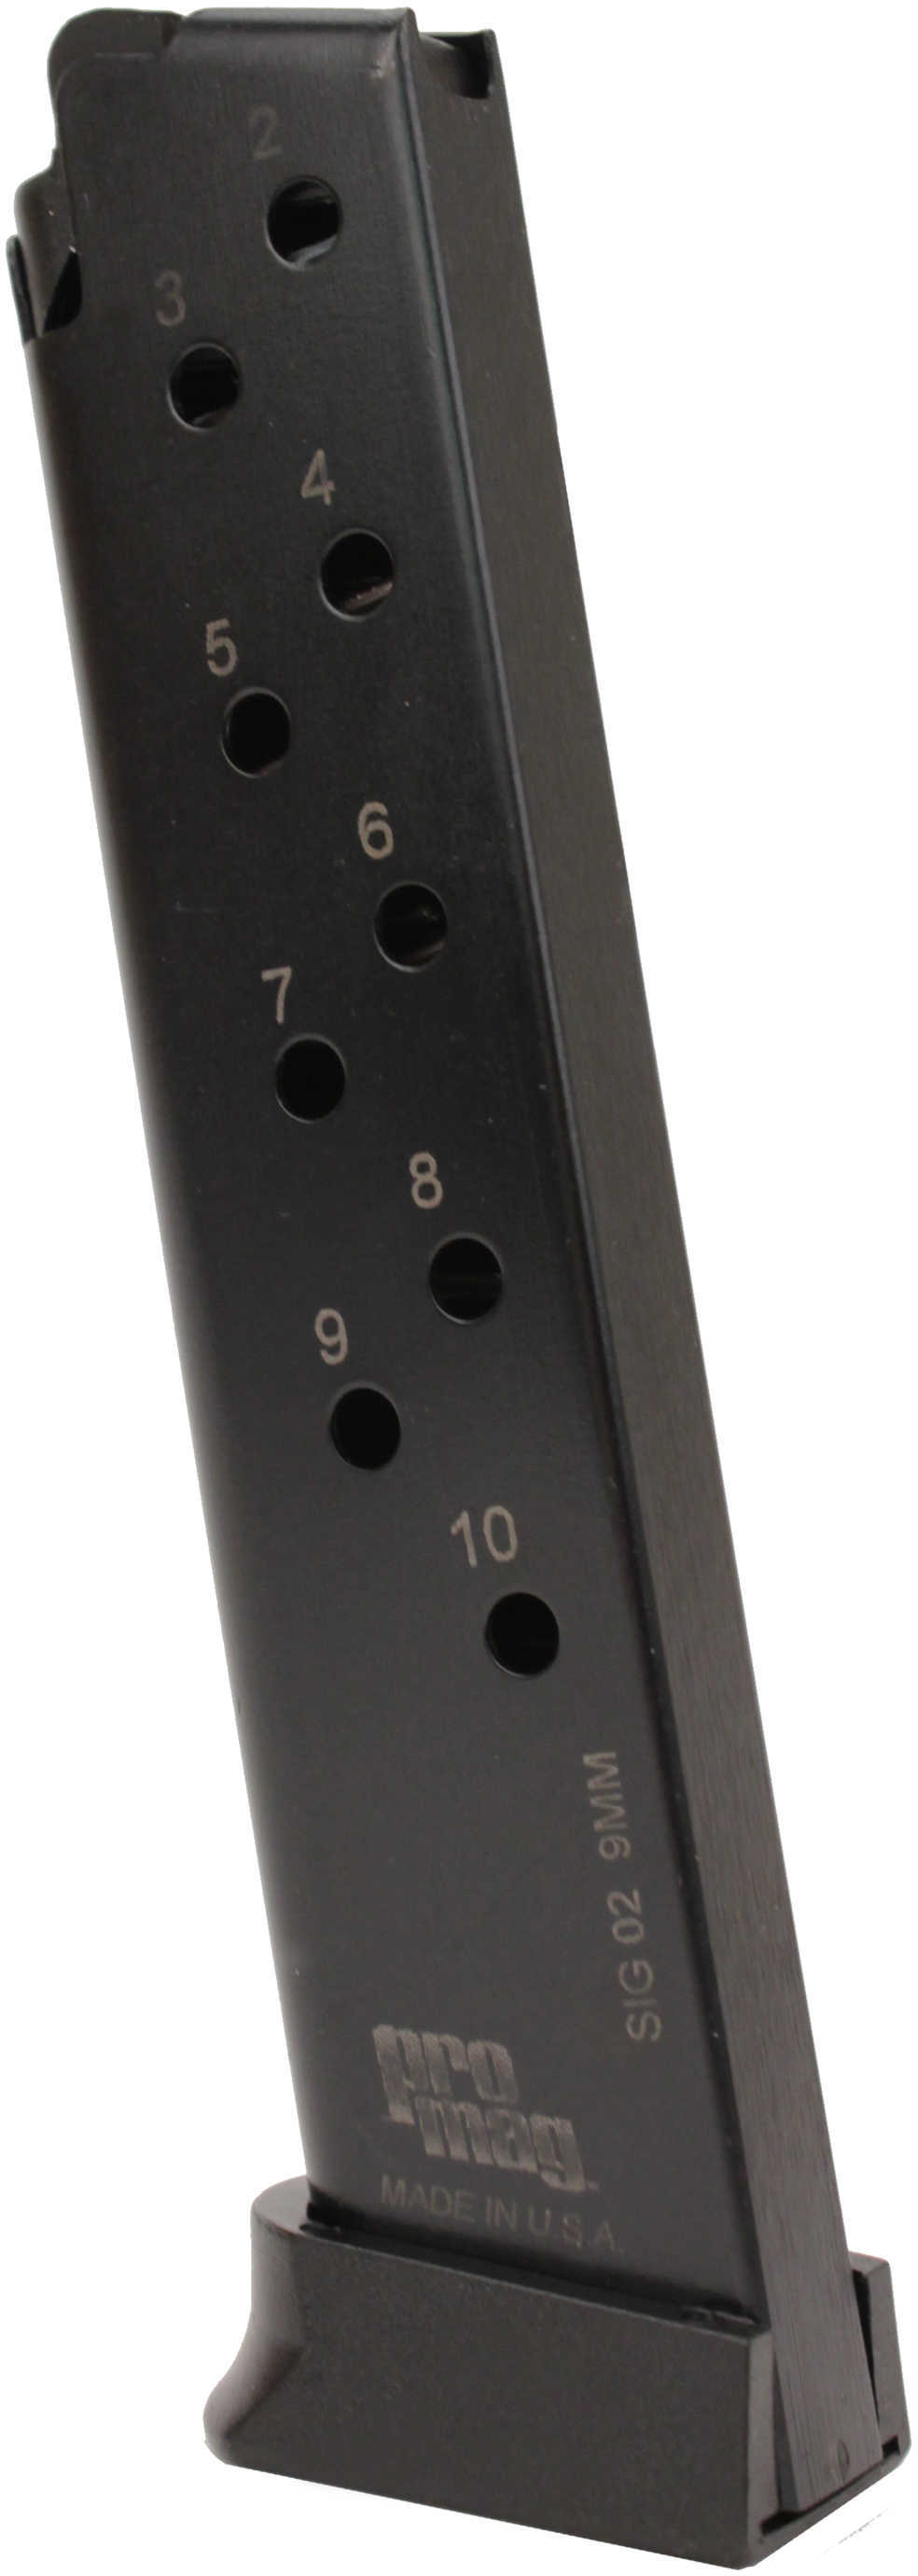 ProMag Sig Sauer P225 Magazine 9mm - 10 round Blue Easy loading Rugged high carbon heat-treated body SIG02